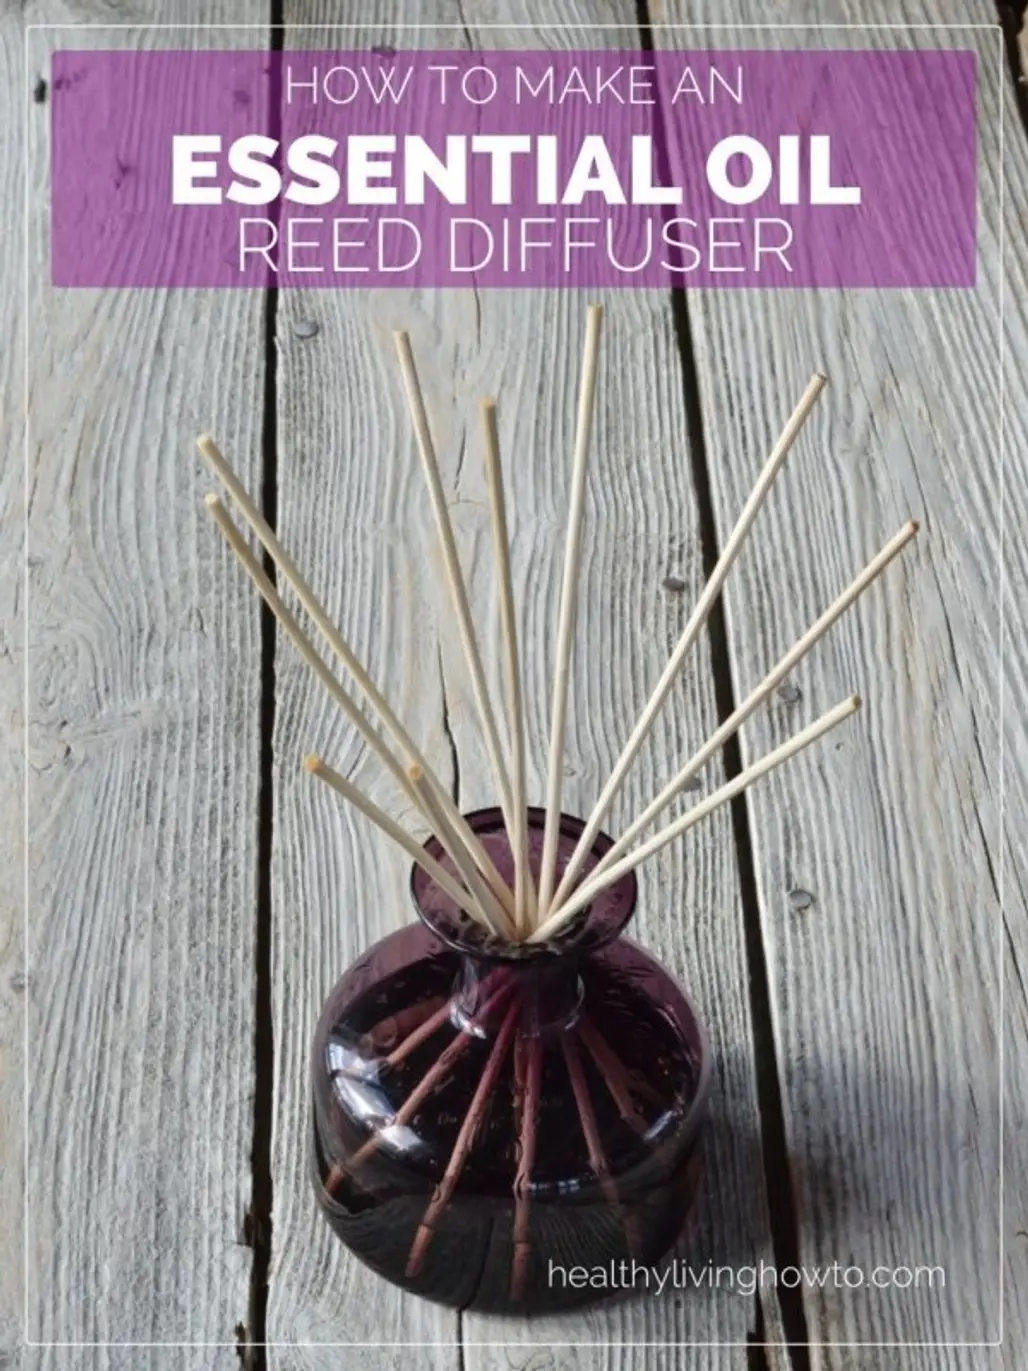 How to Make an Essential Oil Reed Diffuser